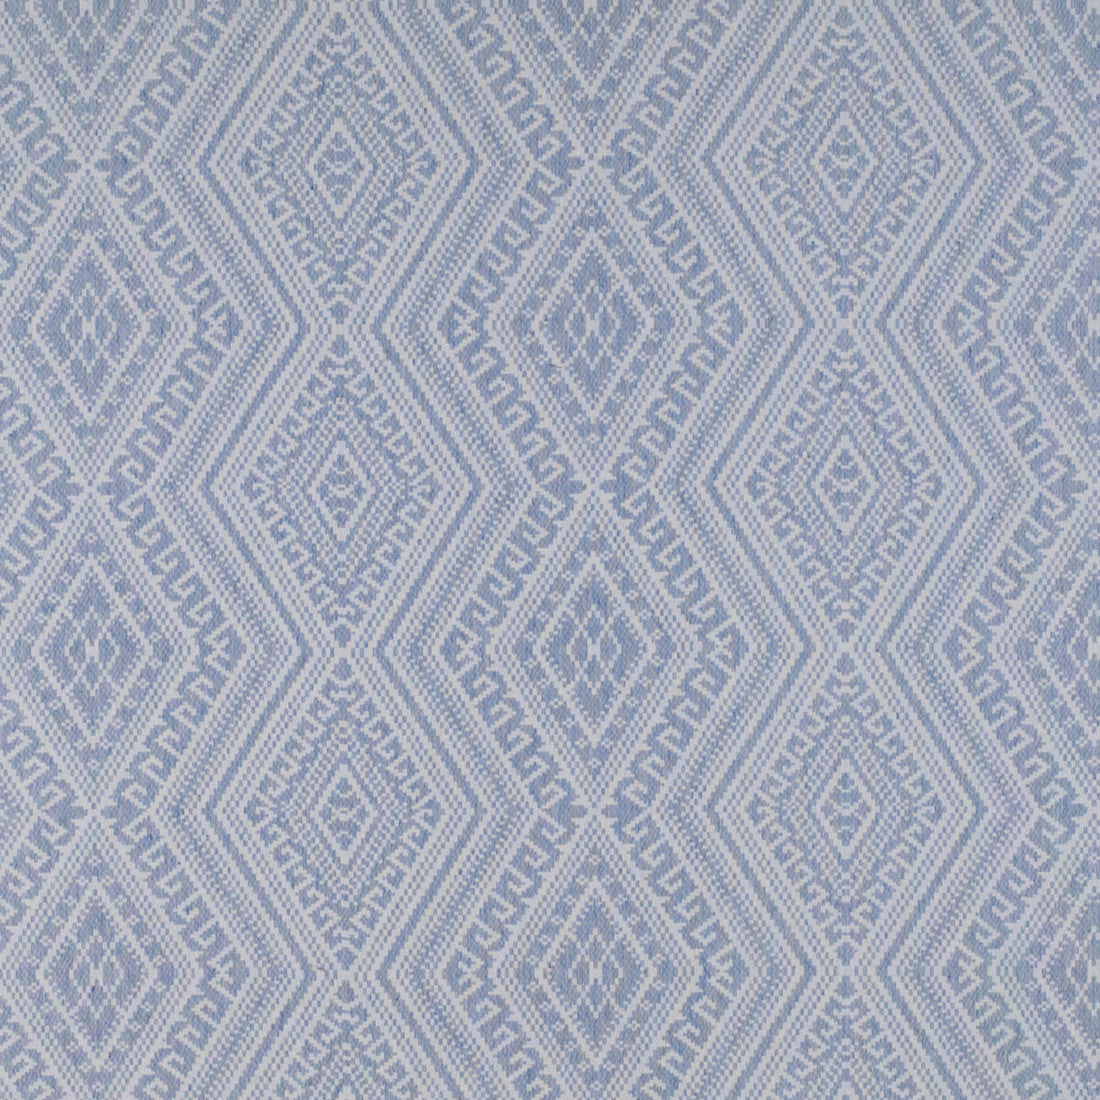 Estromboli fabric in azul claro color - pattern GDT5313.001.0 - by Gaston y Daniela in the Tierras collection